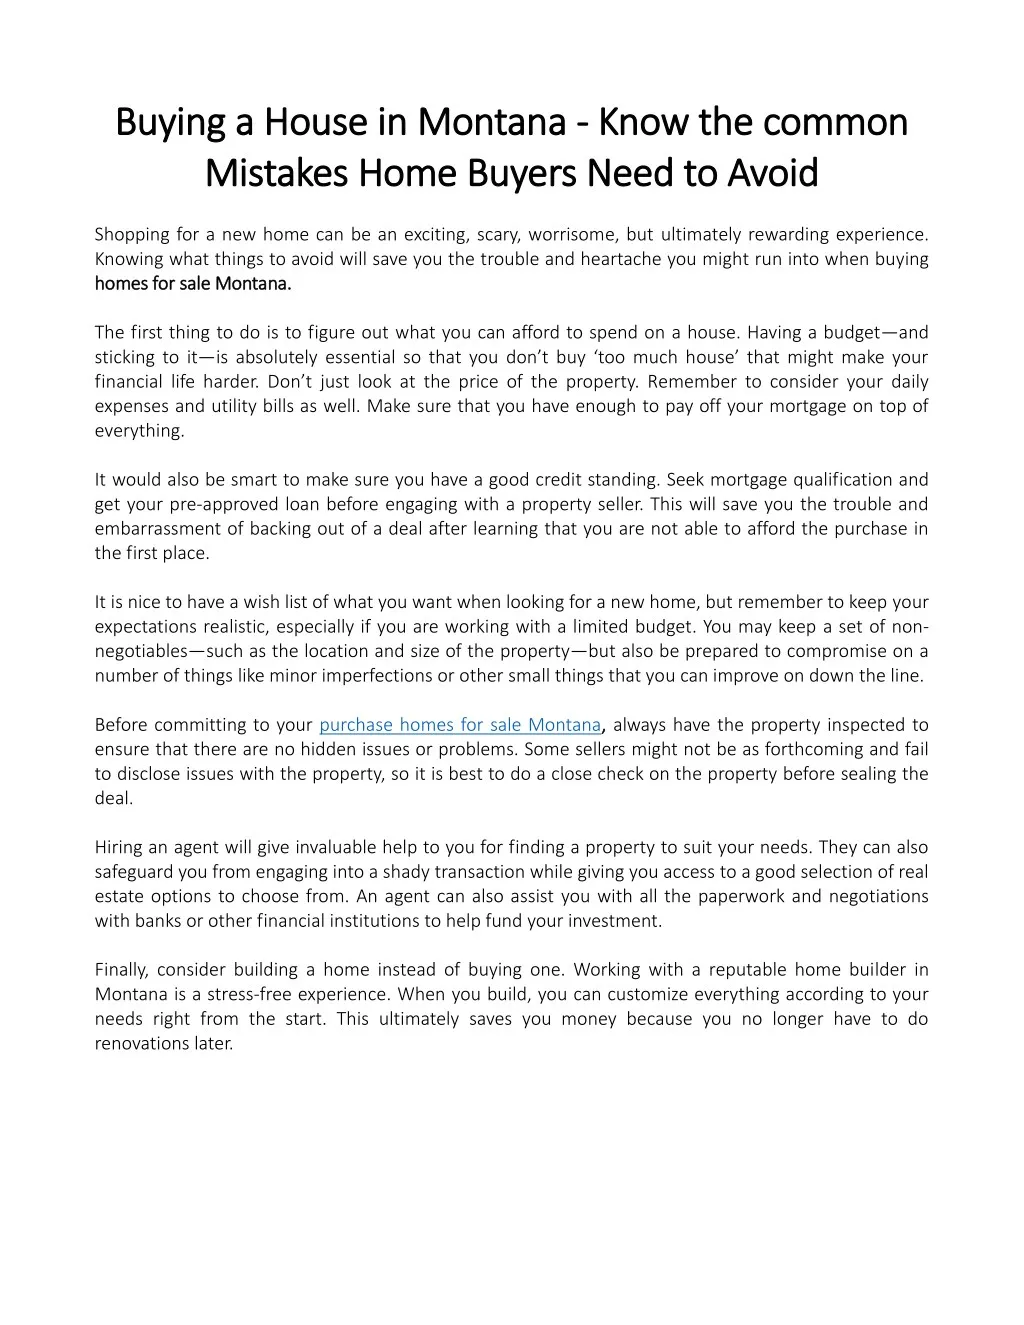 know the the common common mistakes home buyers